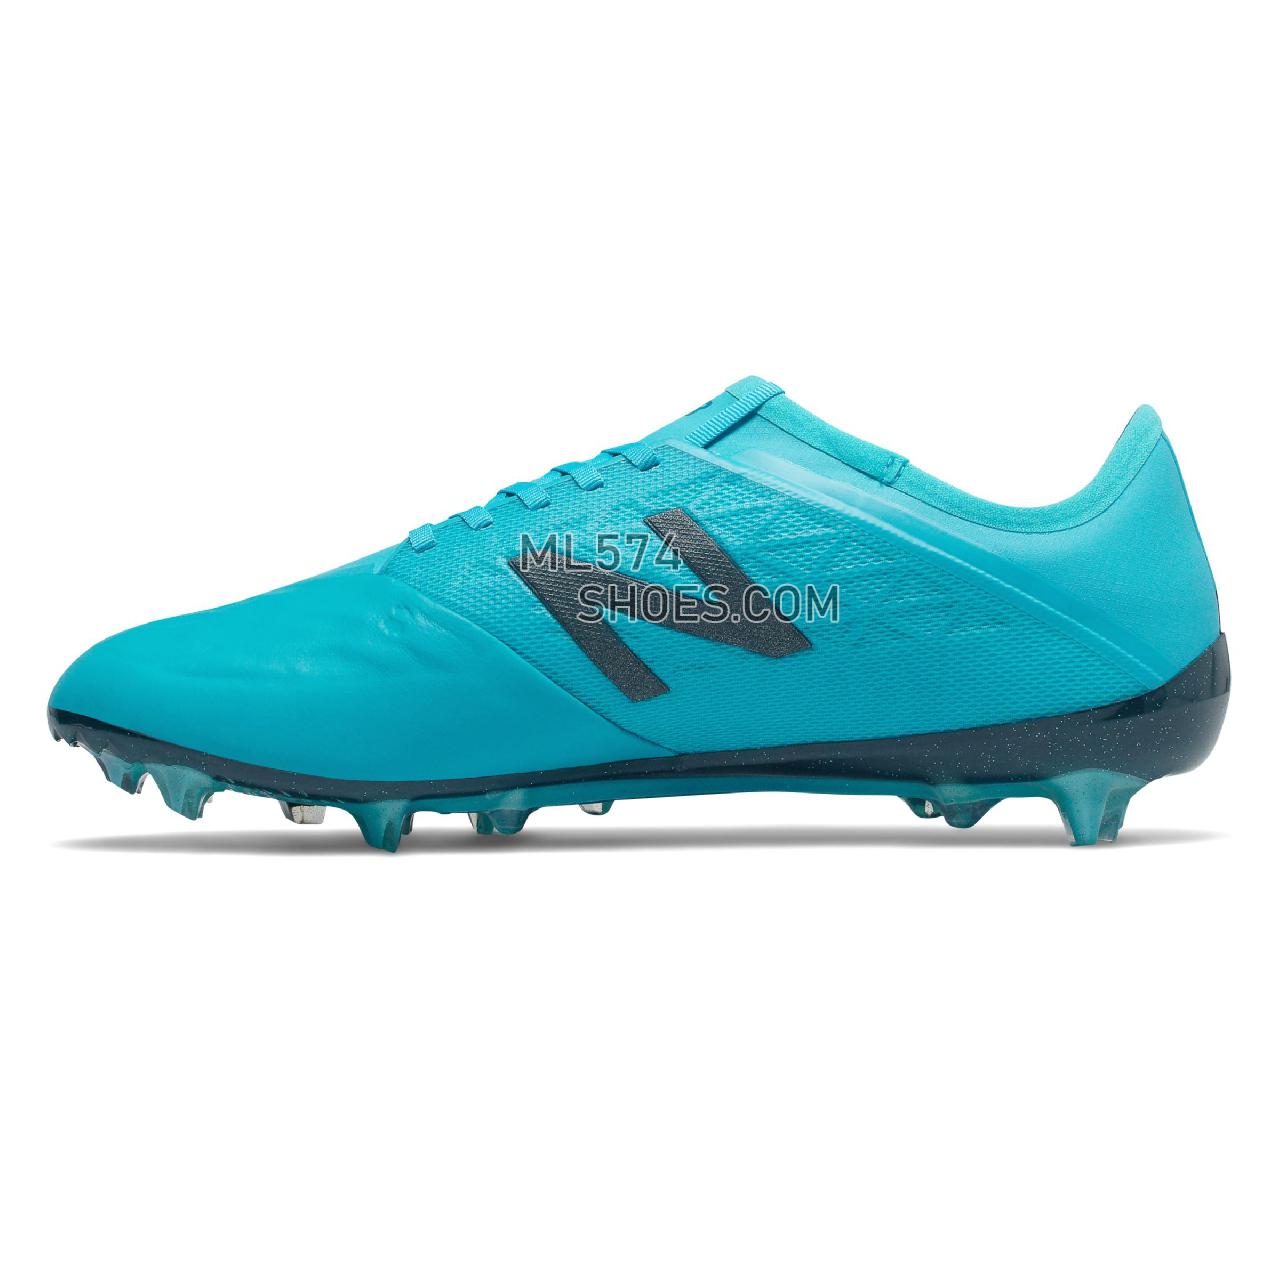 New Balance Furon v5 Pro Leather FG - Men's Soccer - Bayside with Supercell - MSFKFBS5